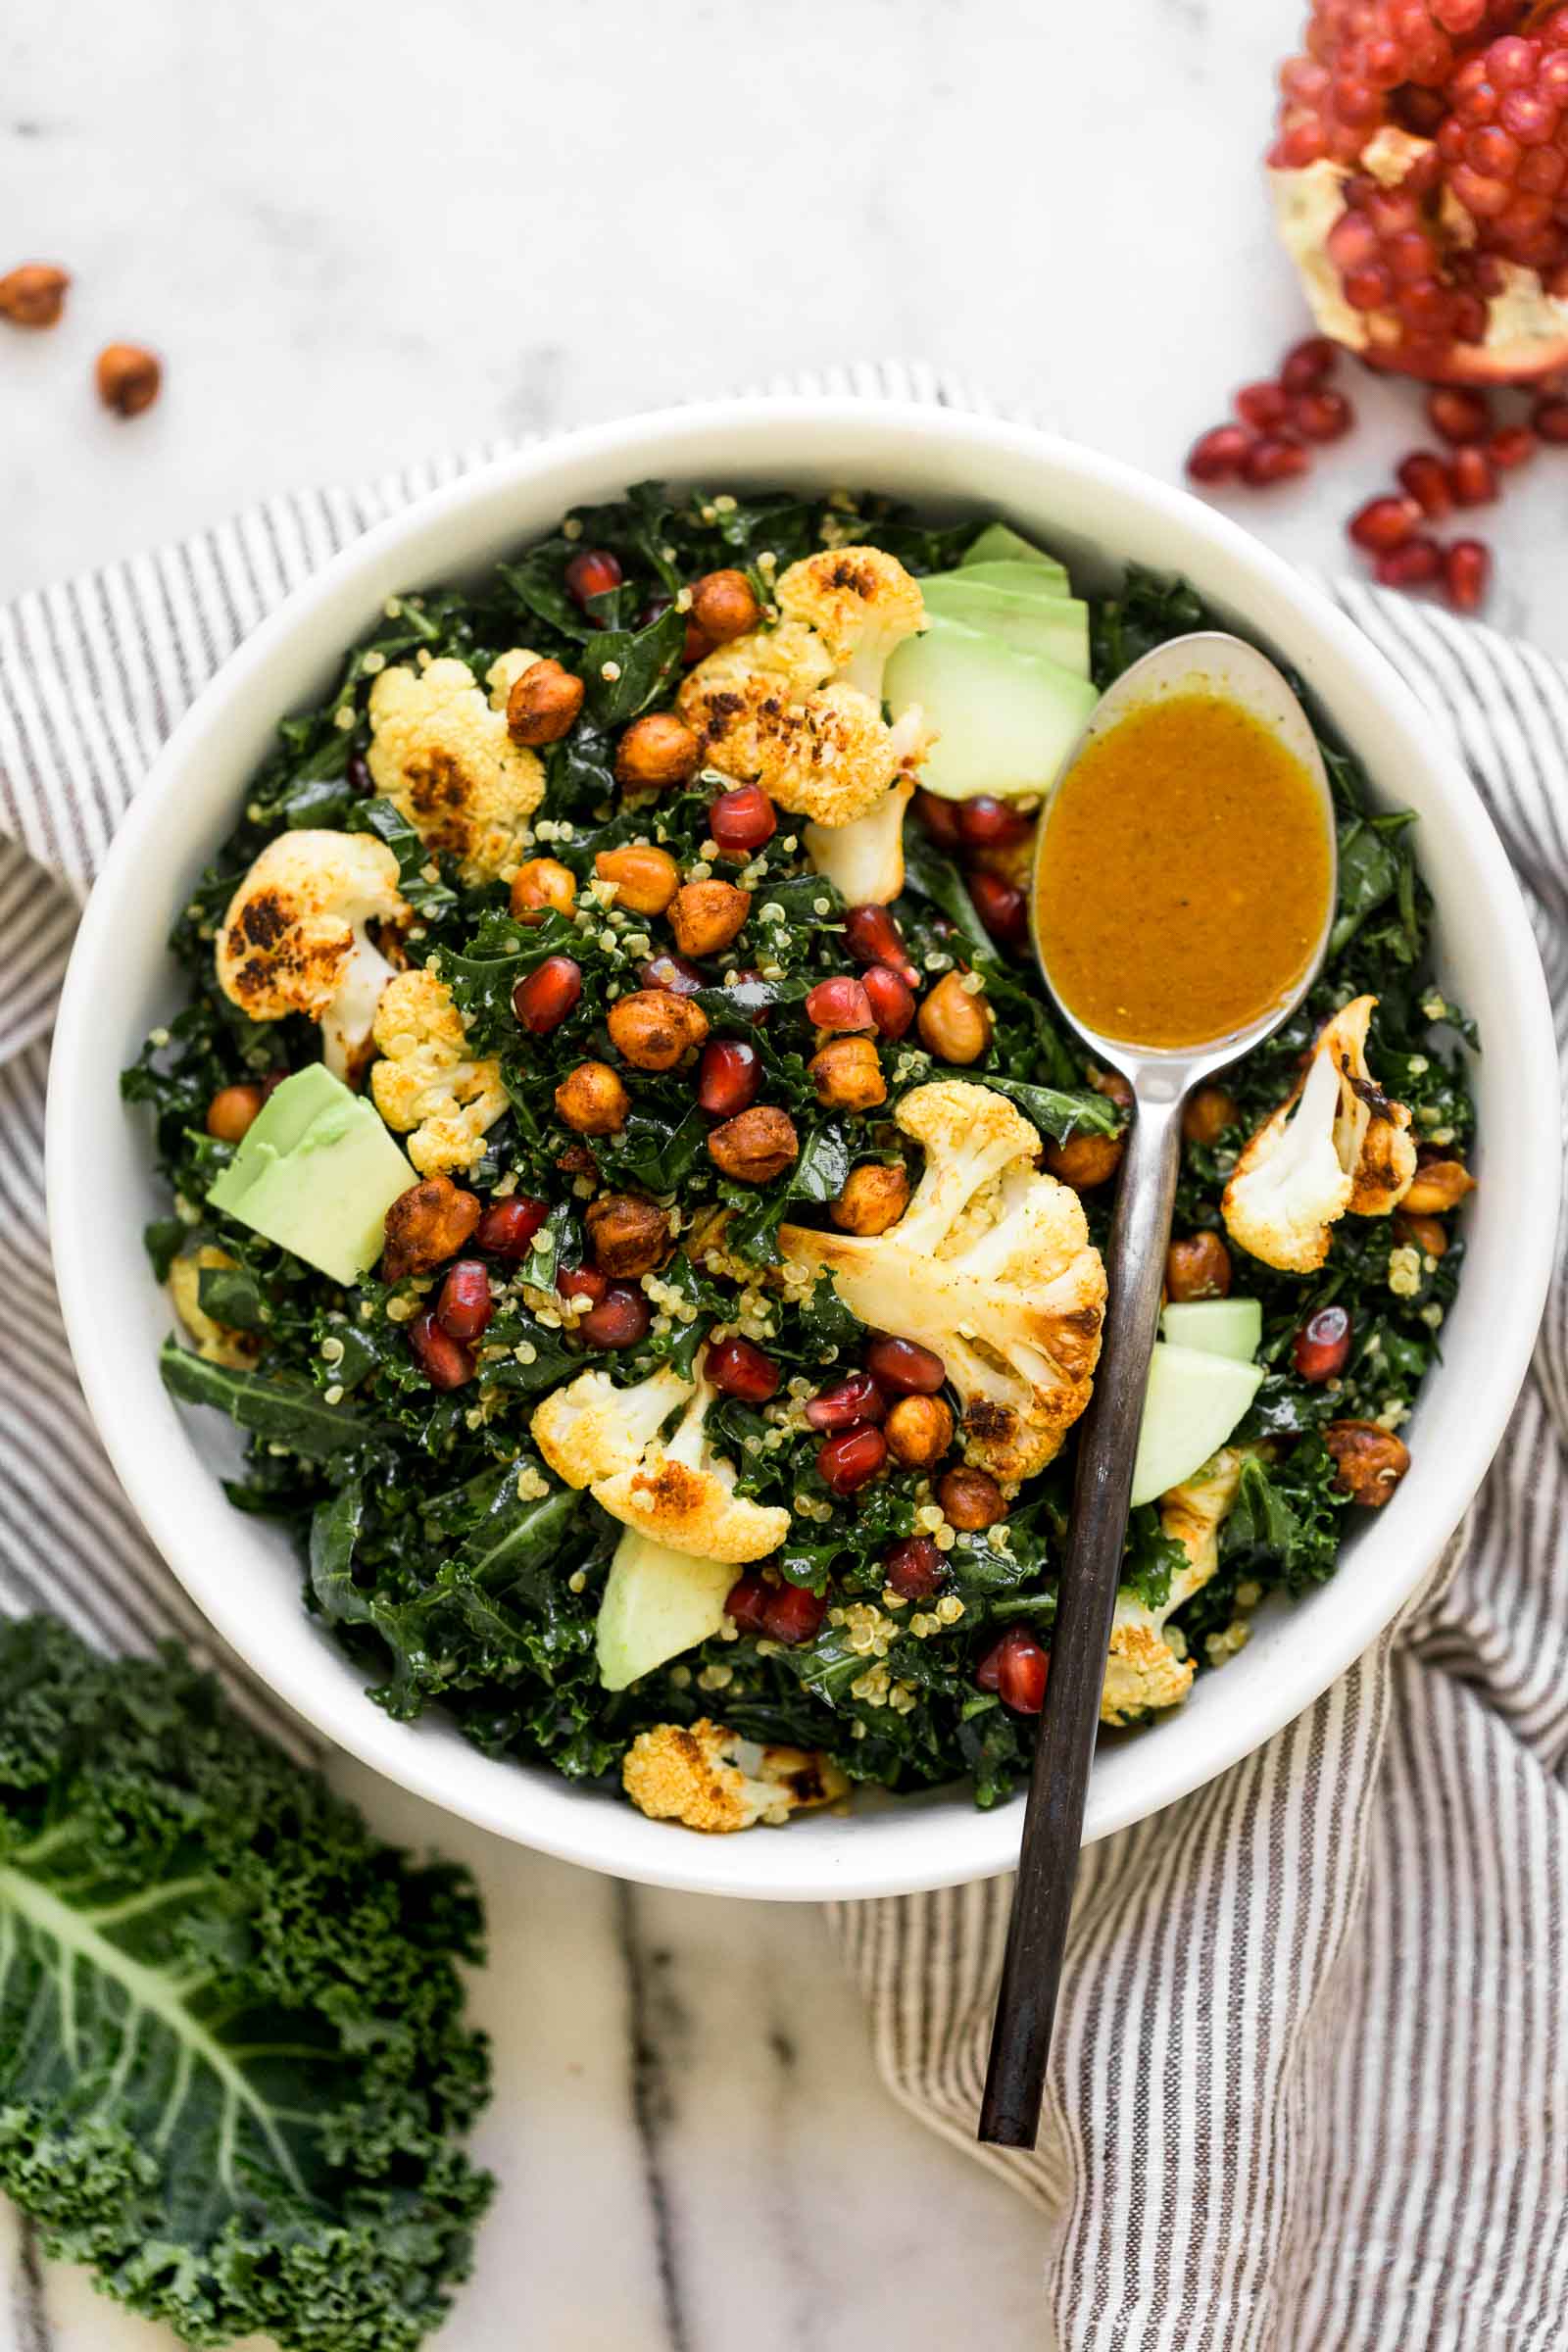 a nourishing & filling winter salad, this winter glow bowl is loaded with the best feel-good winter ingredients: roasted cauliflower, pomegranate arils, avocado, & kale, which all get tossed together in a homemade curry vinaigrette with spiced roasted chickpeas. winter salads have never looked this good! #salad #mealprep #saladrecipe #kalesalad #curryvinaigrette #roastedcauliflower #roastedchickpeas #playswellwithbutter